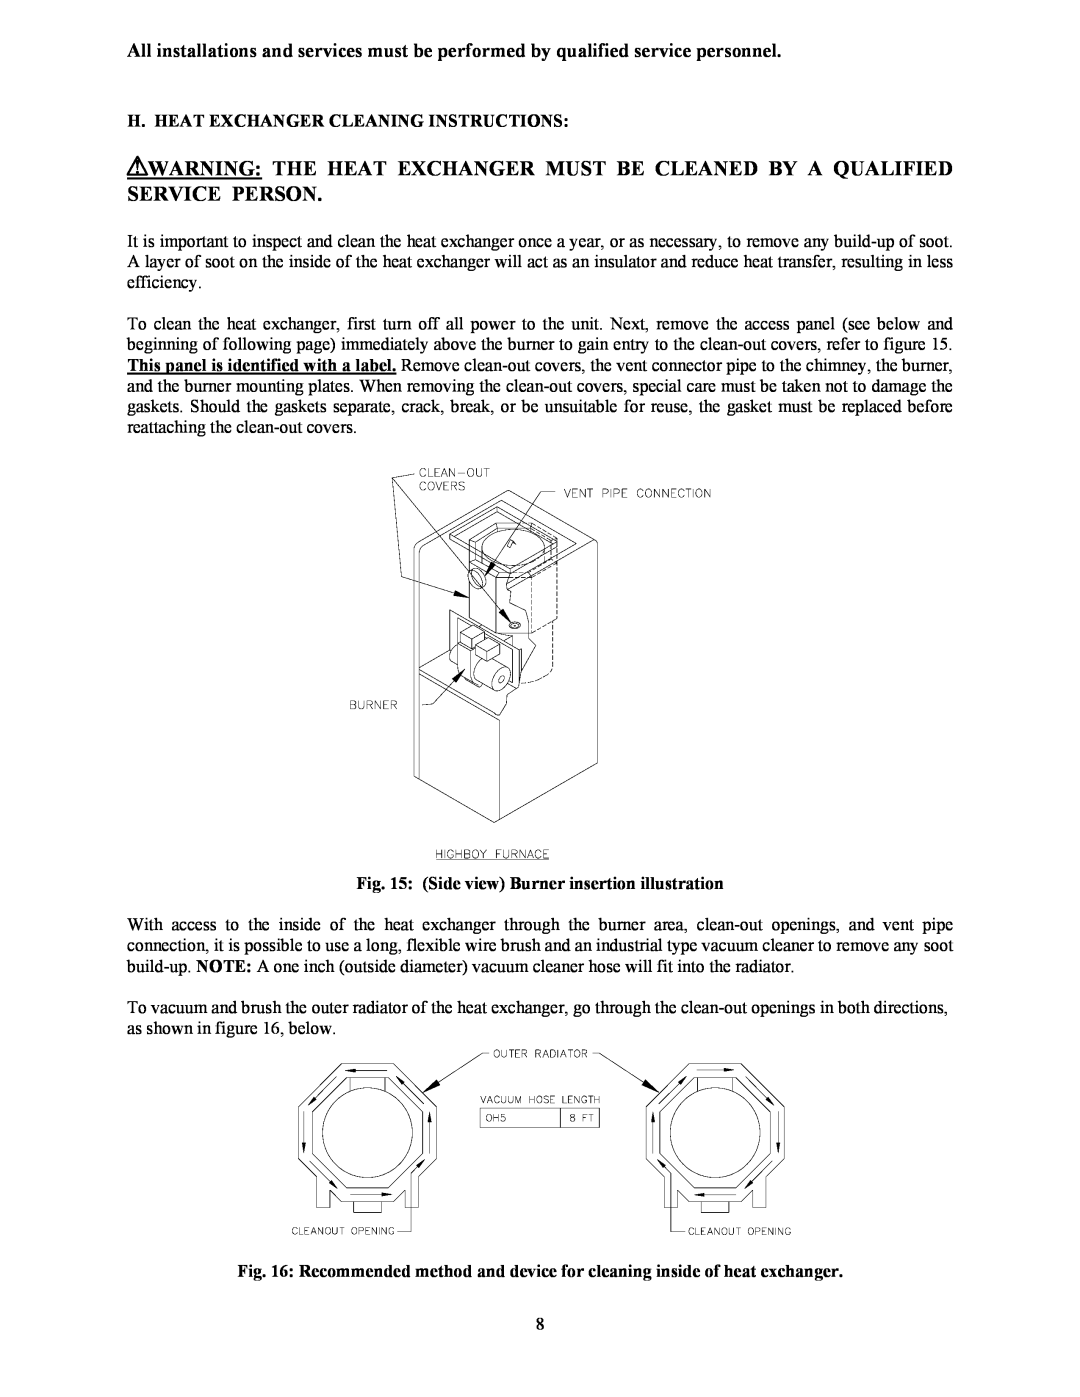 Thermo Products OH5-85DXE operation manual H. Heat Exchanger Cleaning Instructions, Side view Burner insertion illustration 